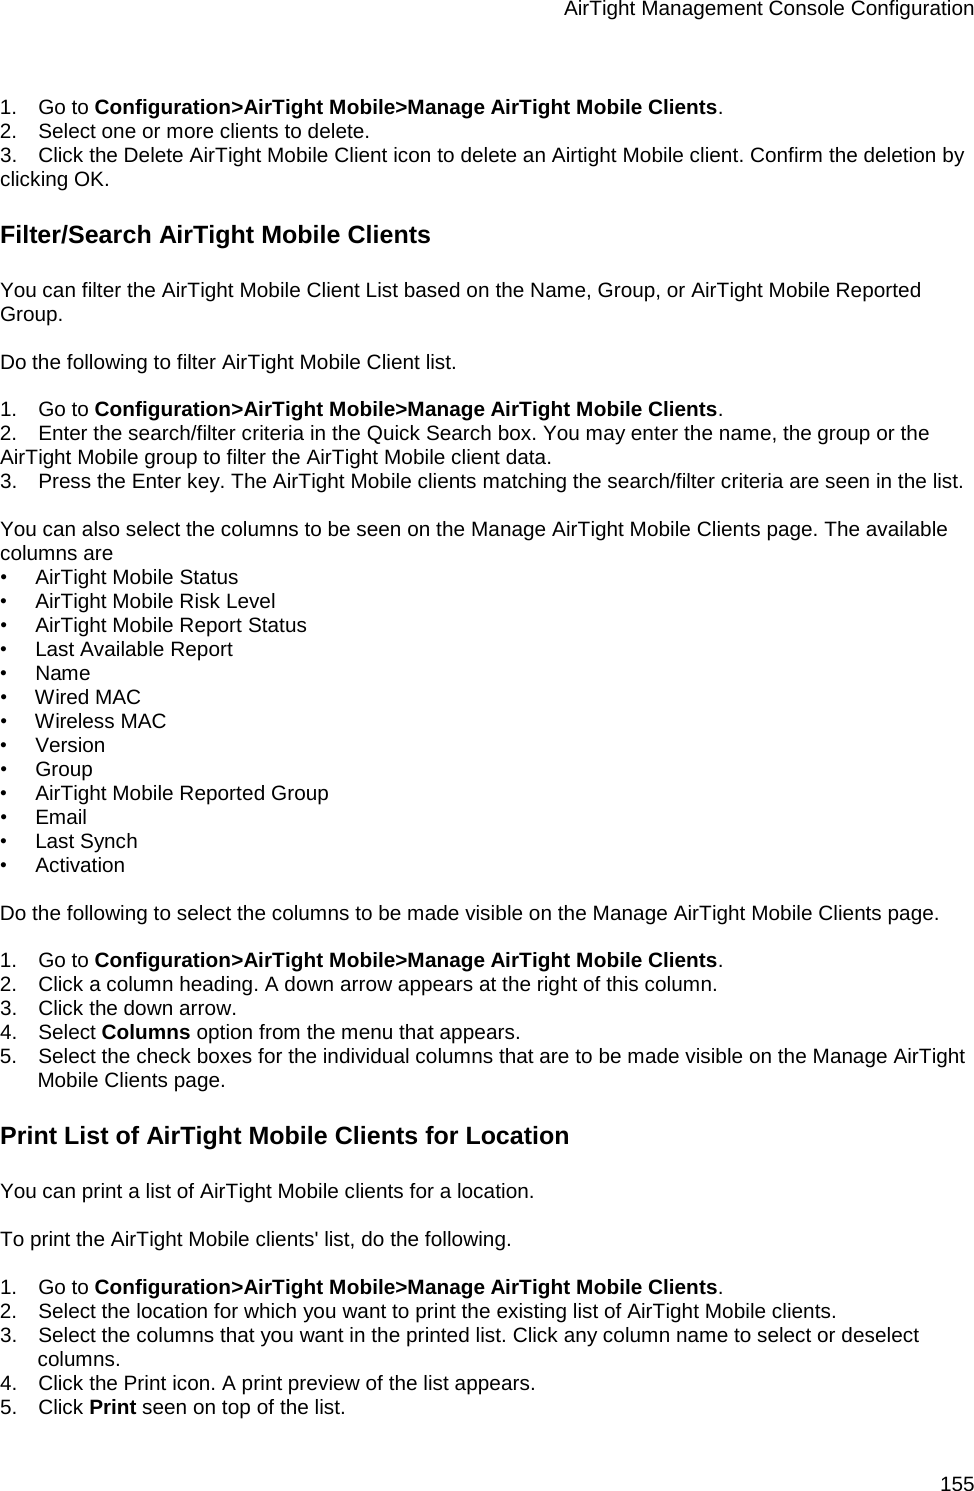 AirTight Management Console Configuration 155   1.      Go to Configuration&gt;AirTight Mobile&gt;Manage AirTight Mobile Clients. 2.      Select one or more clients to delete. 3.      Click the Delete AirTight Mobile Client icon to delete an Airtight Mobile client. Confirm the deletion by clicking OK. Filter/Search AirTight Mobile Clients You can filter the AirTight Mobile Client List based on the Name, Group, or AirTight Mobile Reported Group.   Do the following to filter AirTight Mobile Client list.   1.      Go to Configuration&gt;AirTight Mobile&gt;Manage AirTight Mobile Clients. 2.      Enter the search/filter criteria in the Quick Search box. You may enter the name, the group or the AirTight Mobile group to filter the AirTight Mobile client data. 3.      Press the Enter key. The AirTight Mobile clients matching the search/filter criteria are seen in the list.   You can also select the columns to be seen on the Manage AirTight Mobile Clients page. The available columns are  •        AirTight Mobile Status •        AirTight Mobile Risk Level  •        AirTight Mobile Report Status •        Last Available Report •        Name •        Wired MAC •        Wireless MAC •        Version •        Group •        AirTight Mobile Reported Group •        Email •        Last Synch •        Activation   Do the following to select the columns to be made visible on the Manage AirTight Mobile Clients page.   1.      Go to Configuration&gt;AirTight Mobile&gt;Manage AirTight Mobile Clients. 2.      Click a column heading. A down arrow appears at the right of this column. 3.      Click the down arrow.  4.      Select Columns option from the menu that appears.  5.      Select the check boxes for the individual columns that are to be made visible on the Manage AirTight Mobile Clients page. Print List of AirTight Mobile Clients for Location You can print a list of AirTight Mobile clients for a location.   To print the AirTight Mobile clients&apos; list, do the following.   1.      Go to Configuration&gt;AirTight Mobile&gt;Manage AirTight Mobile Clients. 2.      Select the location for which you want to print the existing list of AirTight Mobile clients. 3.      Select the columns that you want in the printed list. Click any column name to select or deselect columns. 4.      Click the Print icon. A print preview of the list appears. 5.      Click Print seen on top of the list. 